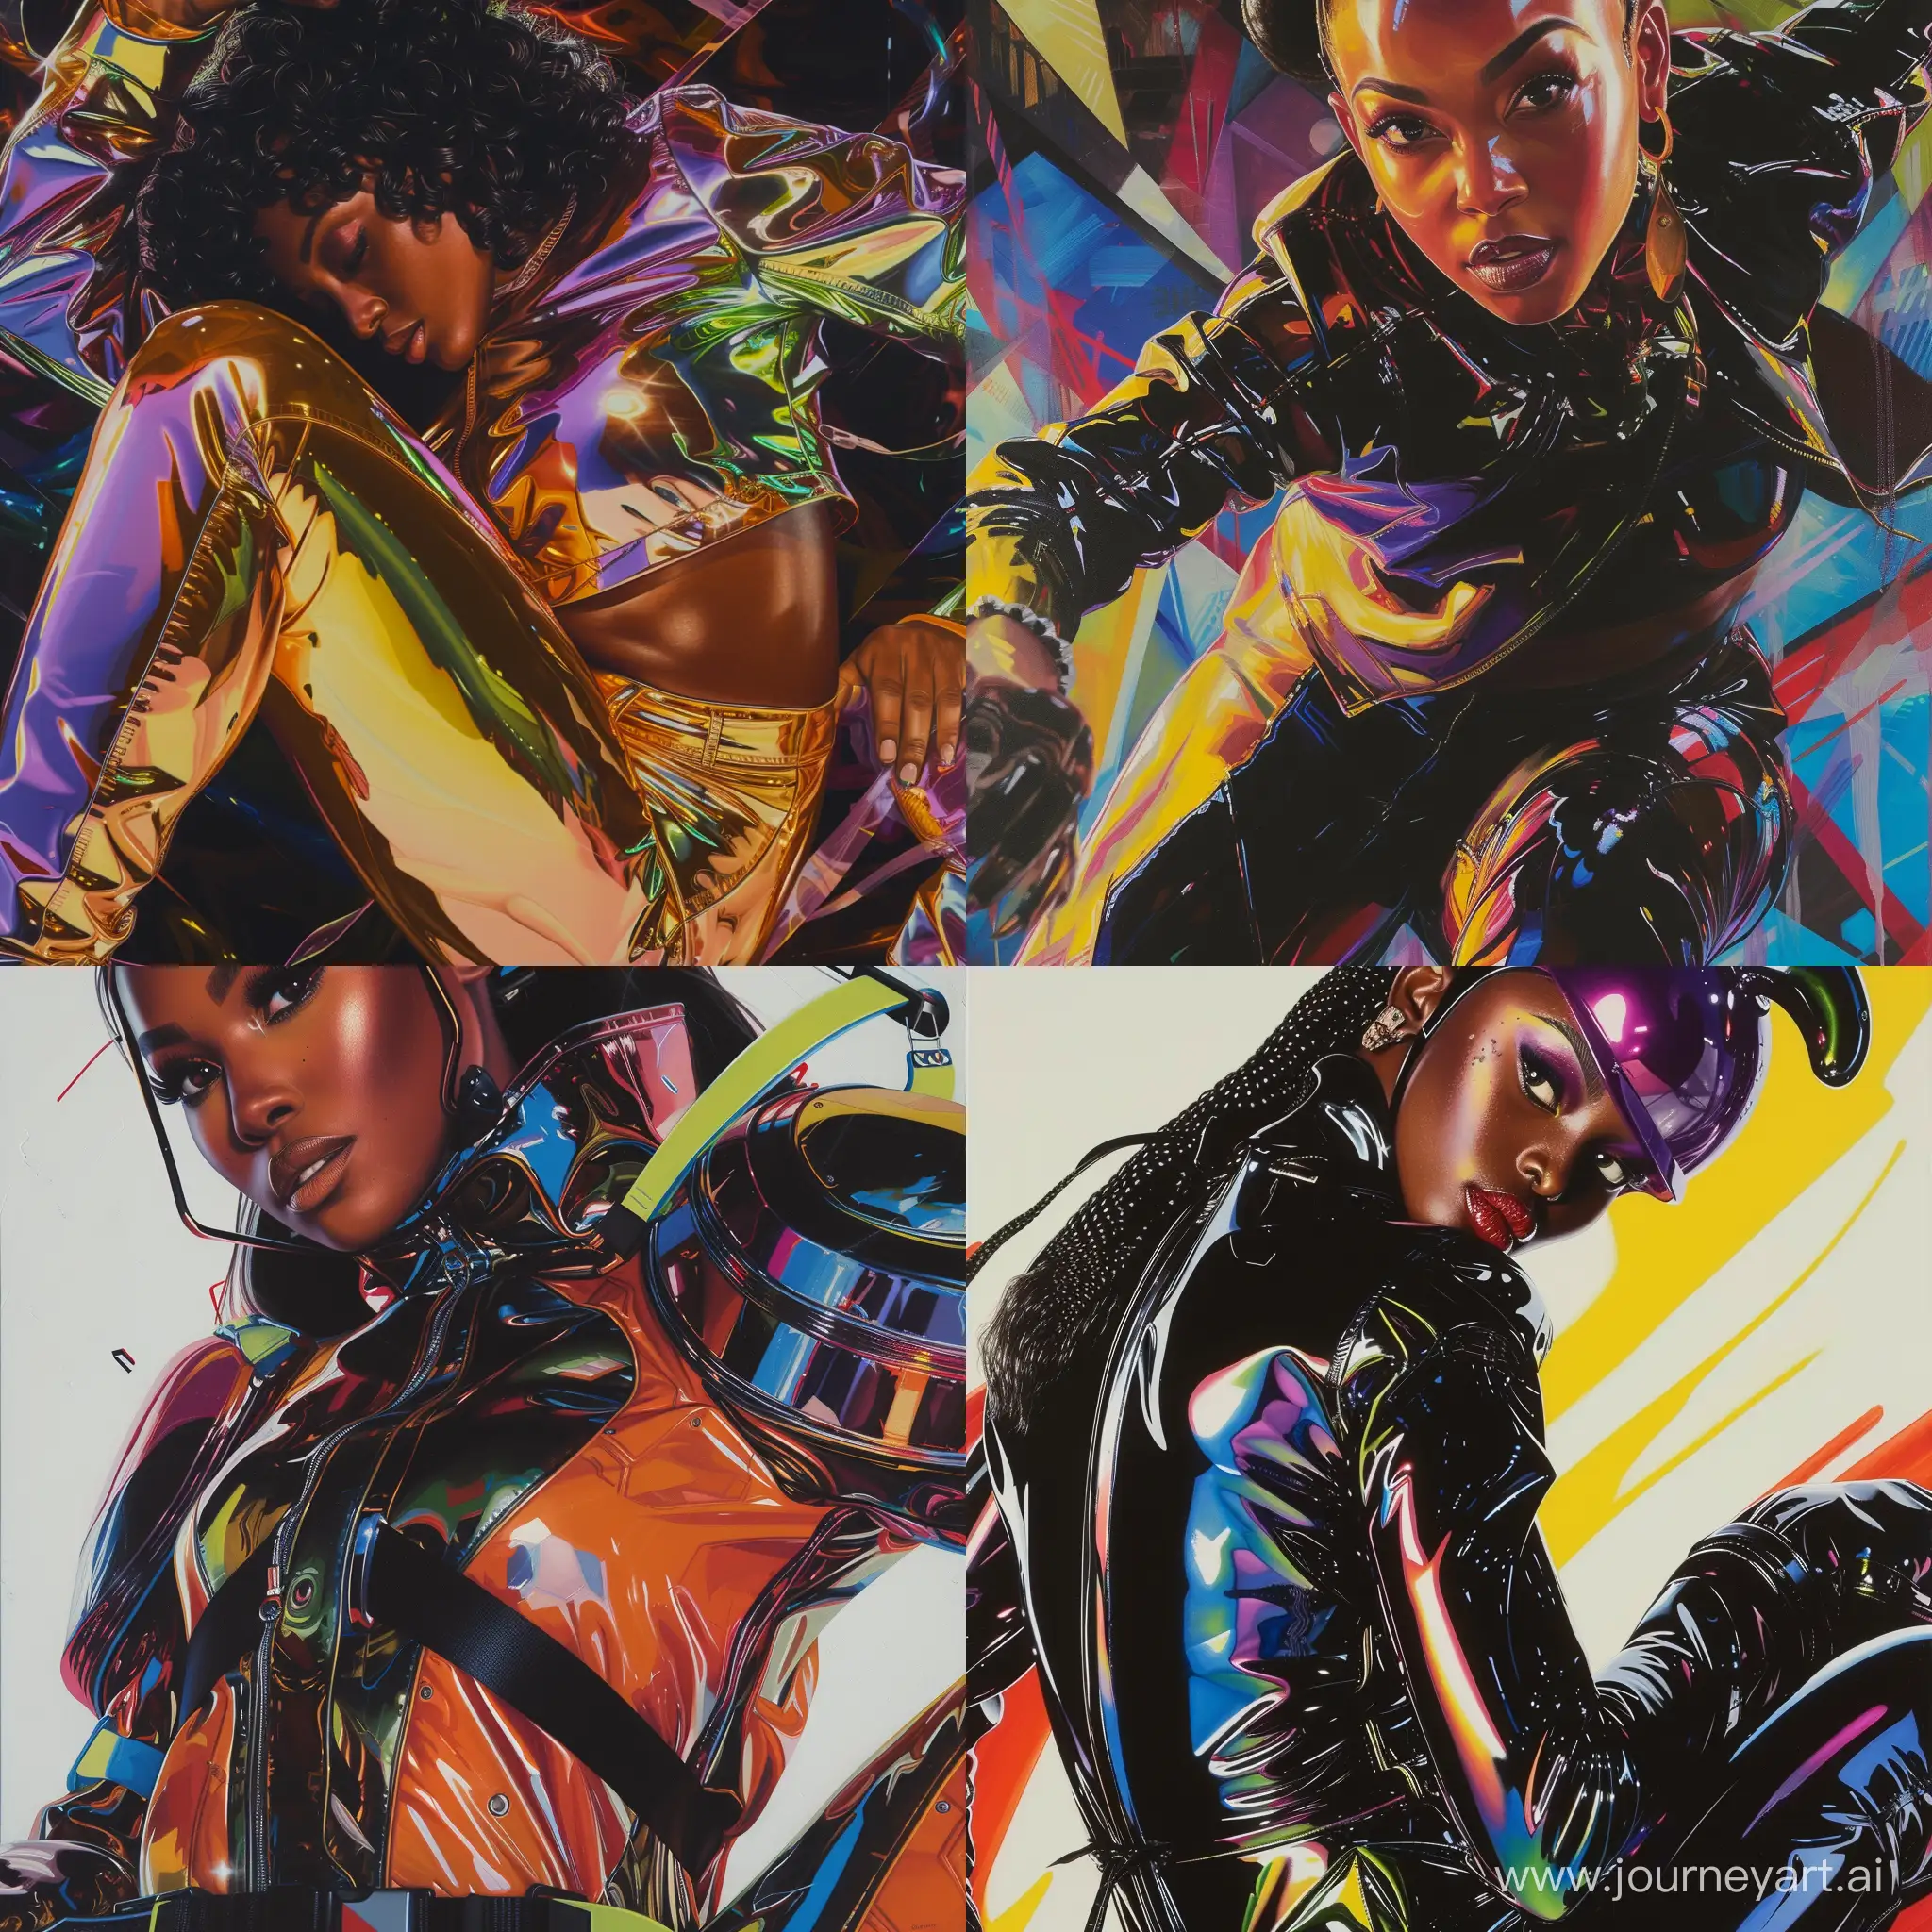 A 4K HDR 300DPI professional close vivid full-body view of a colorful glossy hyper-realistic oil painting of a detailed illustration full length photo single image of”,a Futurist-inspired artwork portraying black women in dynamic poses, capturing the energy and movement of the modern age,